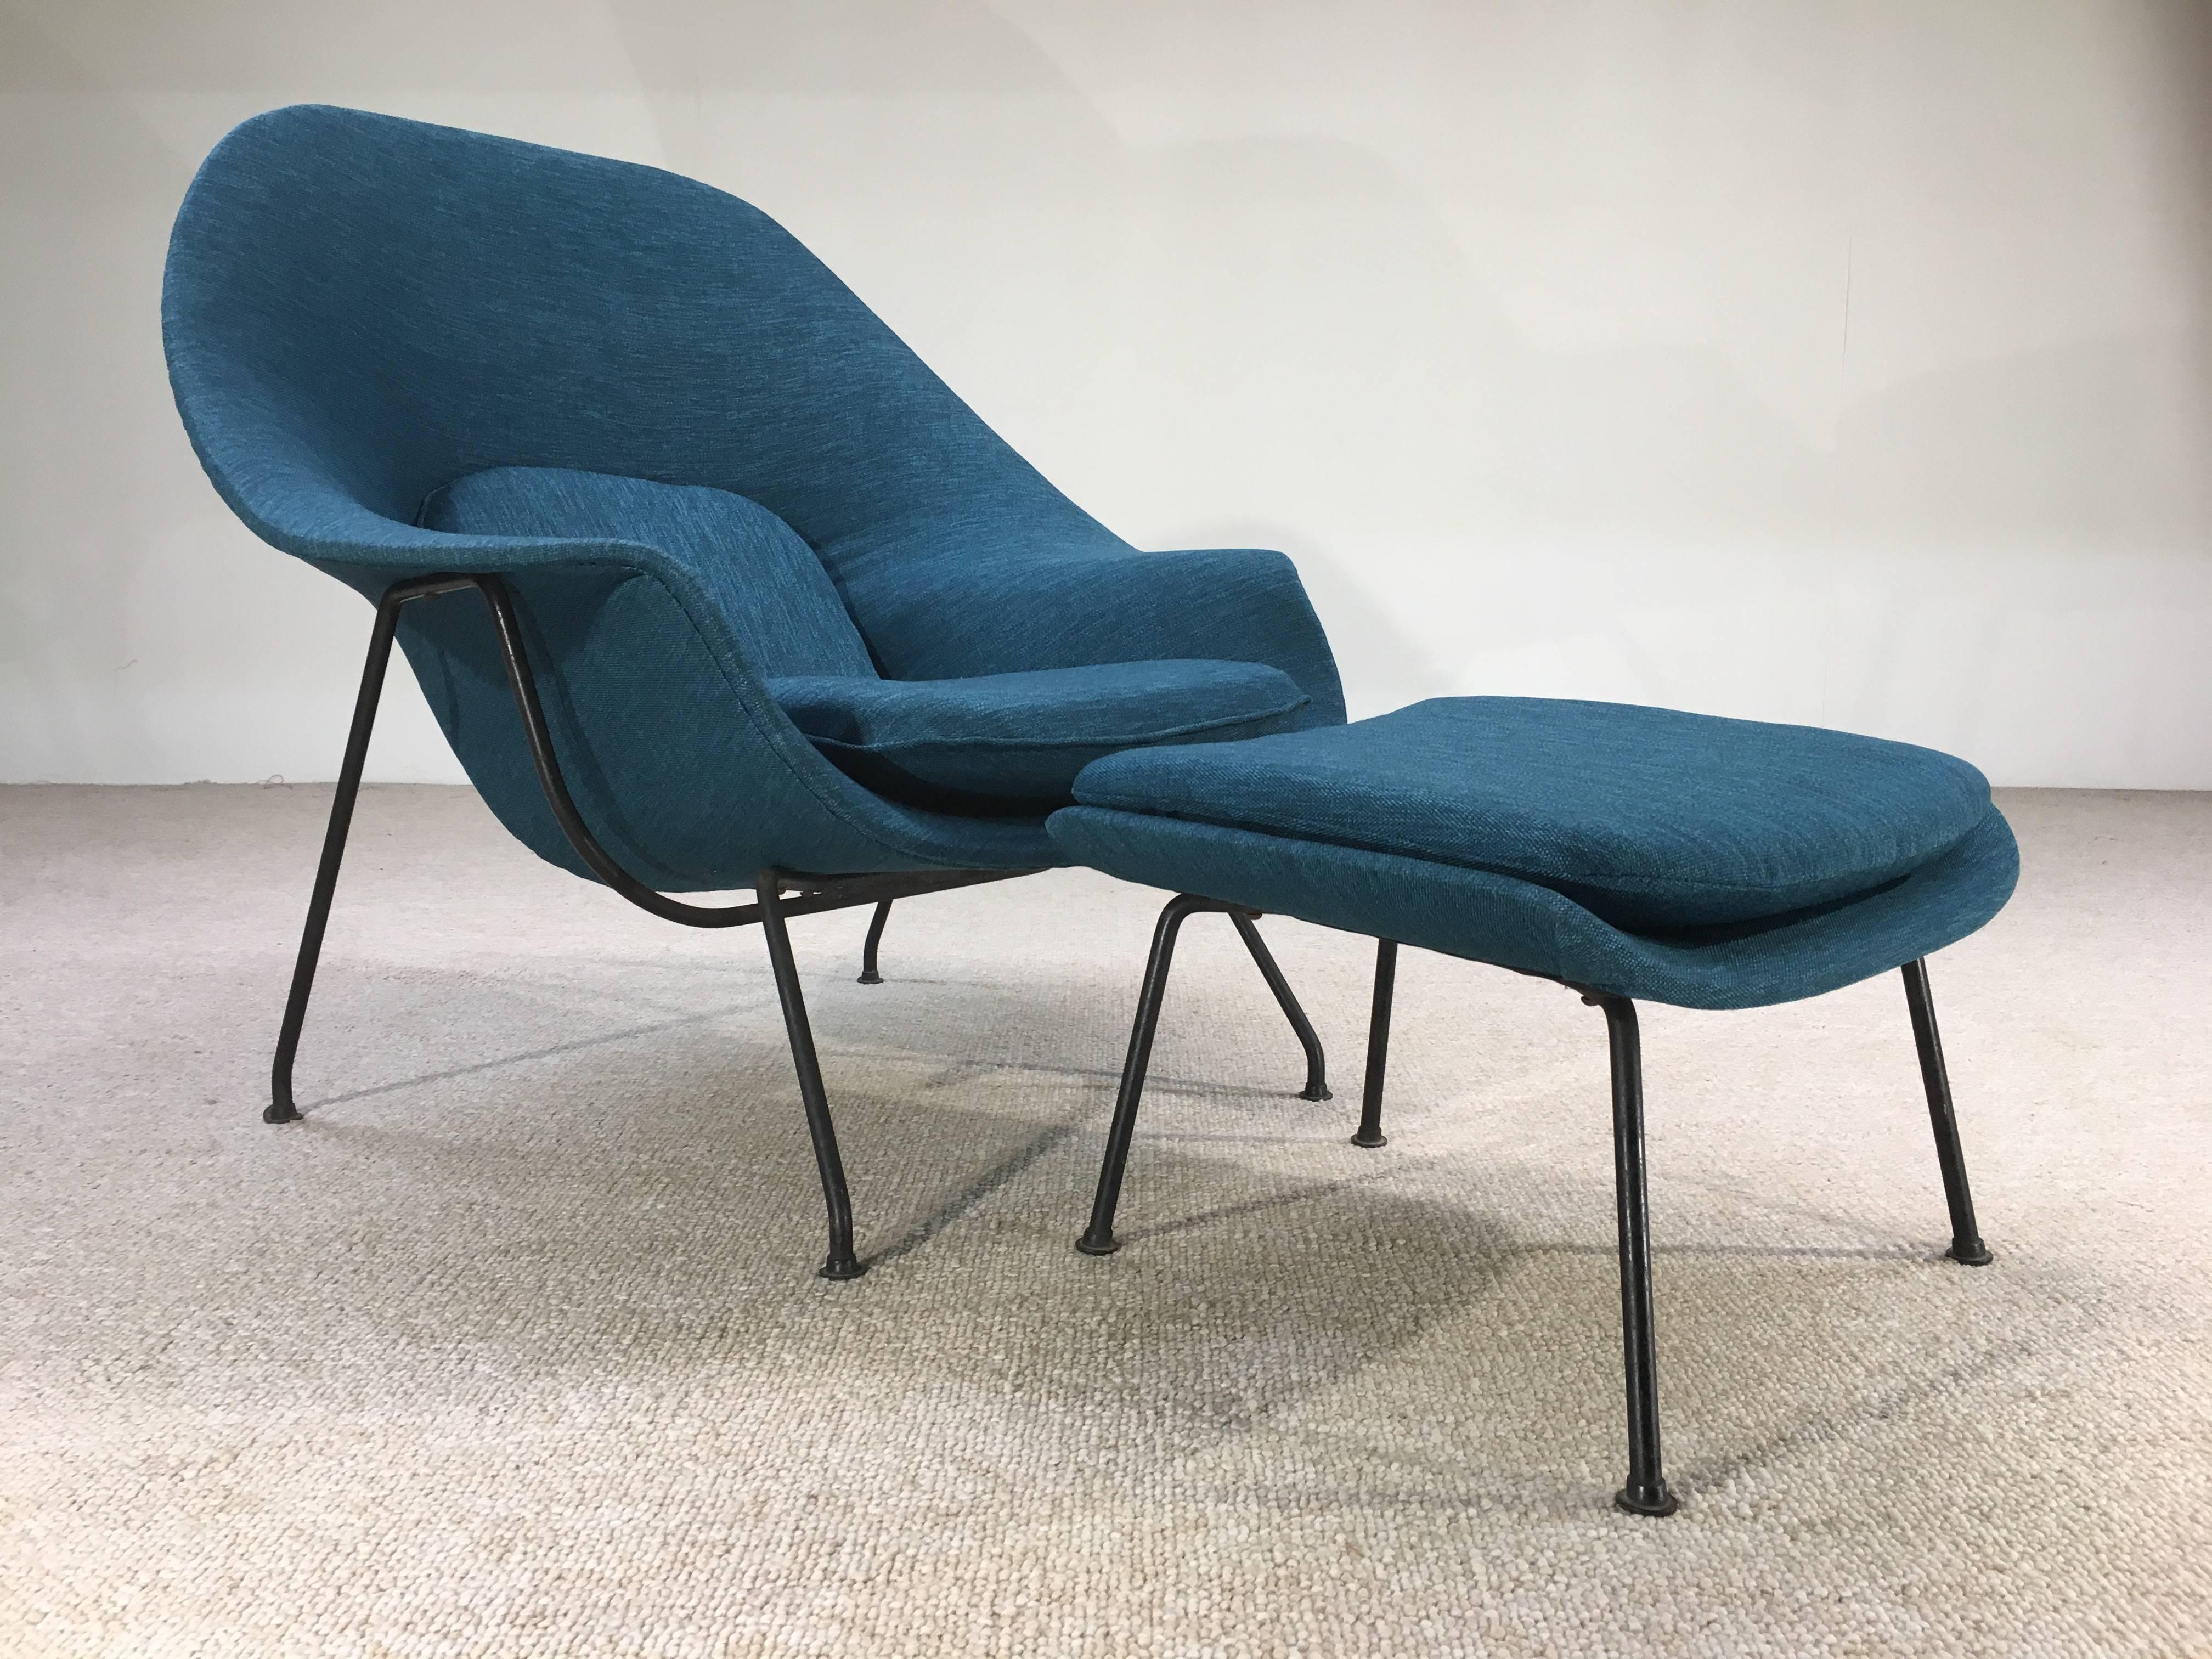 A rare 1st edition example of Eero Saarinen's classic Womb chair with ottoman for Knoll having the signature 1st gen floor glides and hand welded frame. A beautiful set that has been newly reupholstered in a poly/cotton stitched blend. 

Ottoman